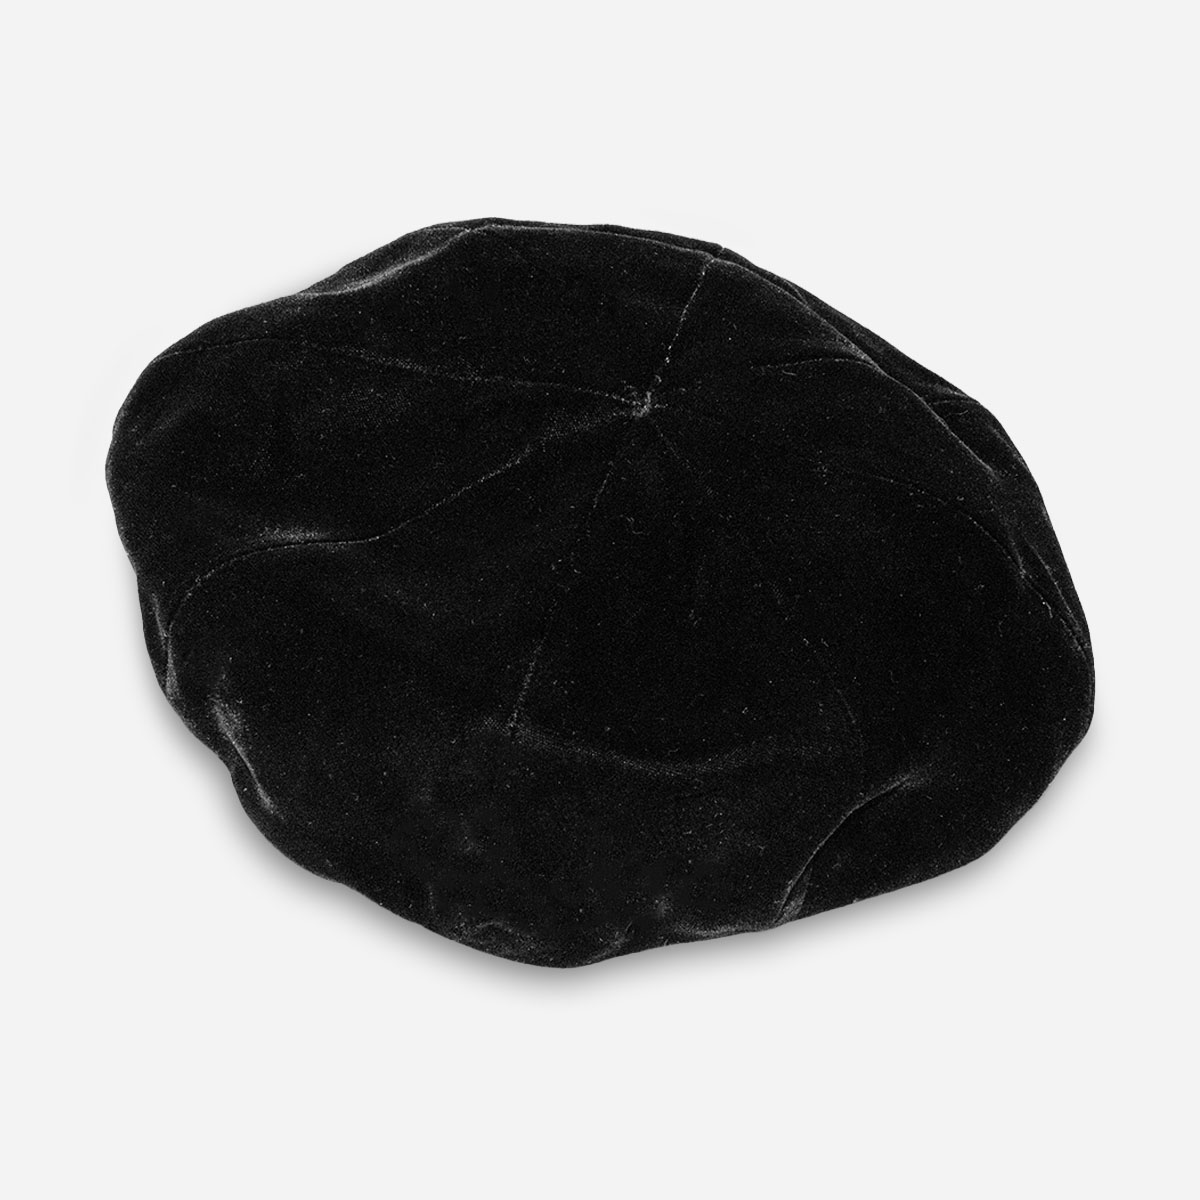 Black pillbox hat in velvet from peck and peck department store